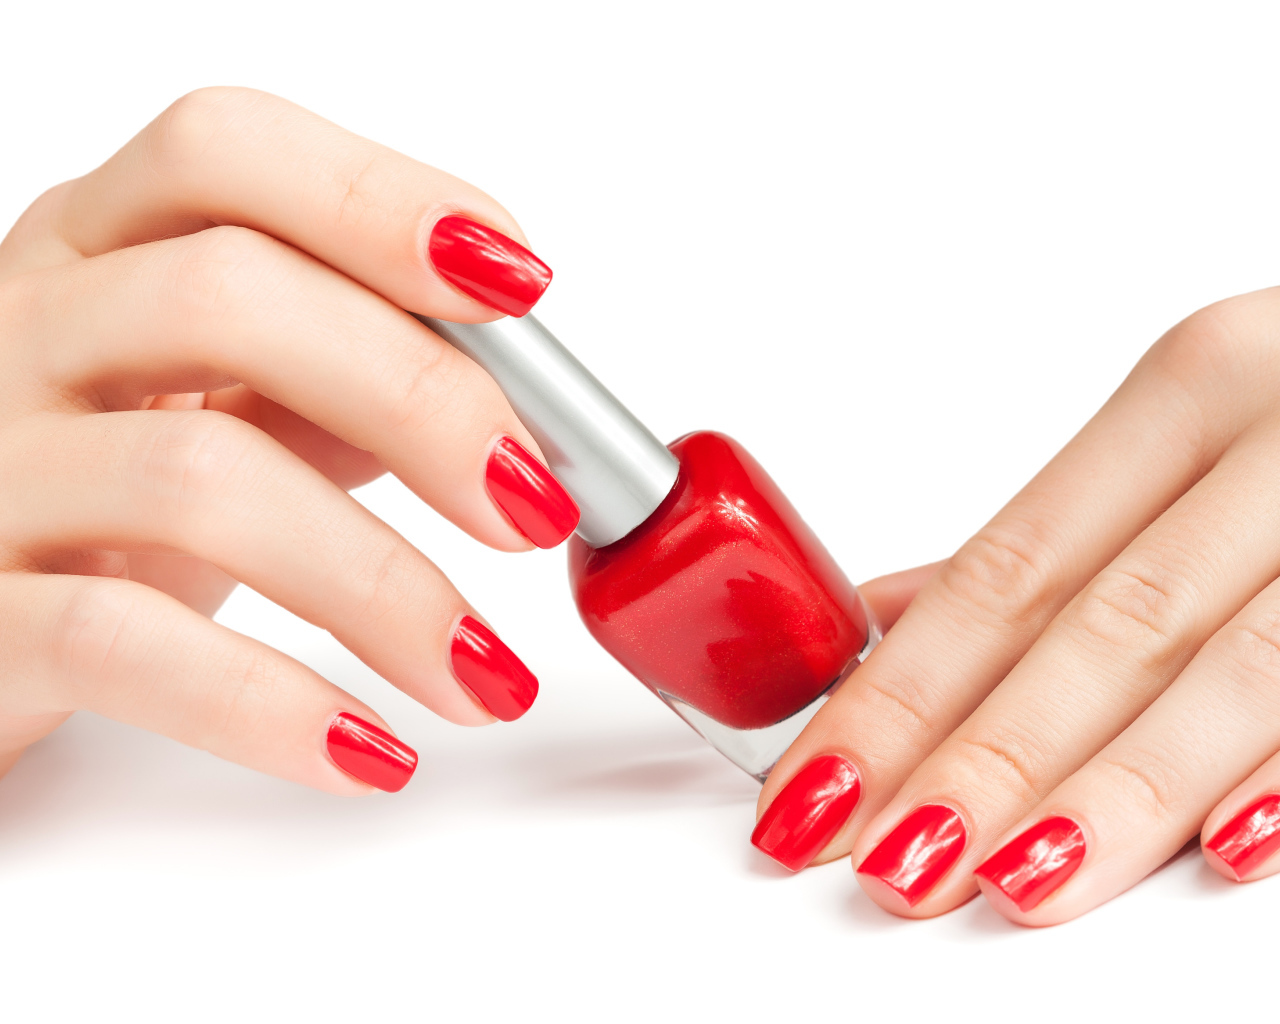 Female hands with a red manicure and varnish on a white background